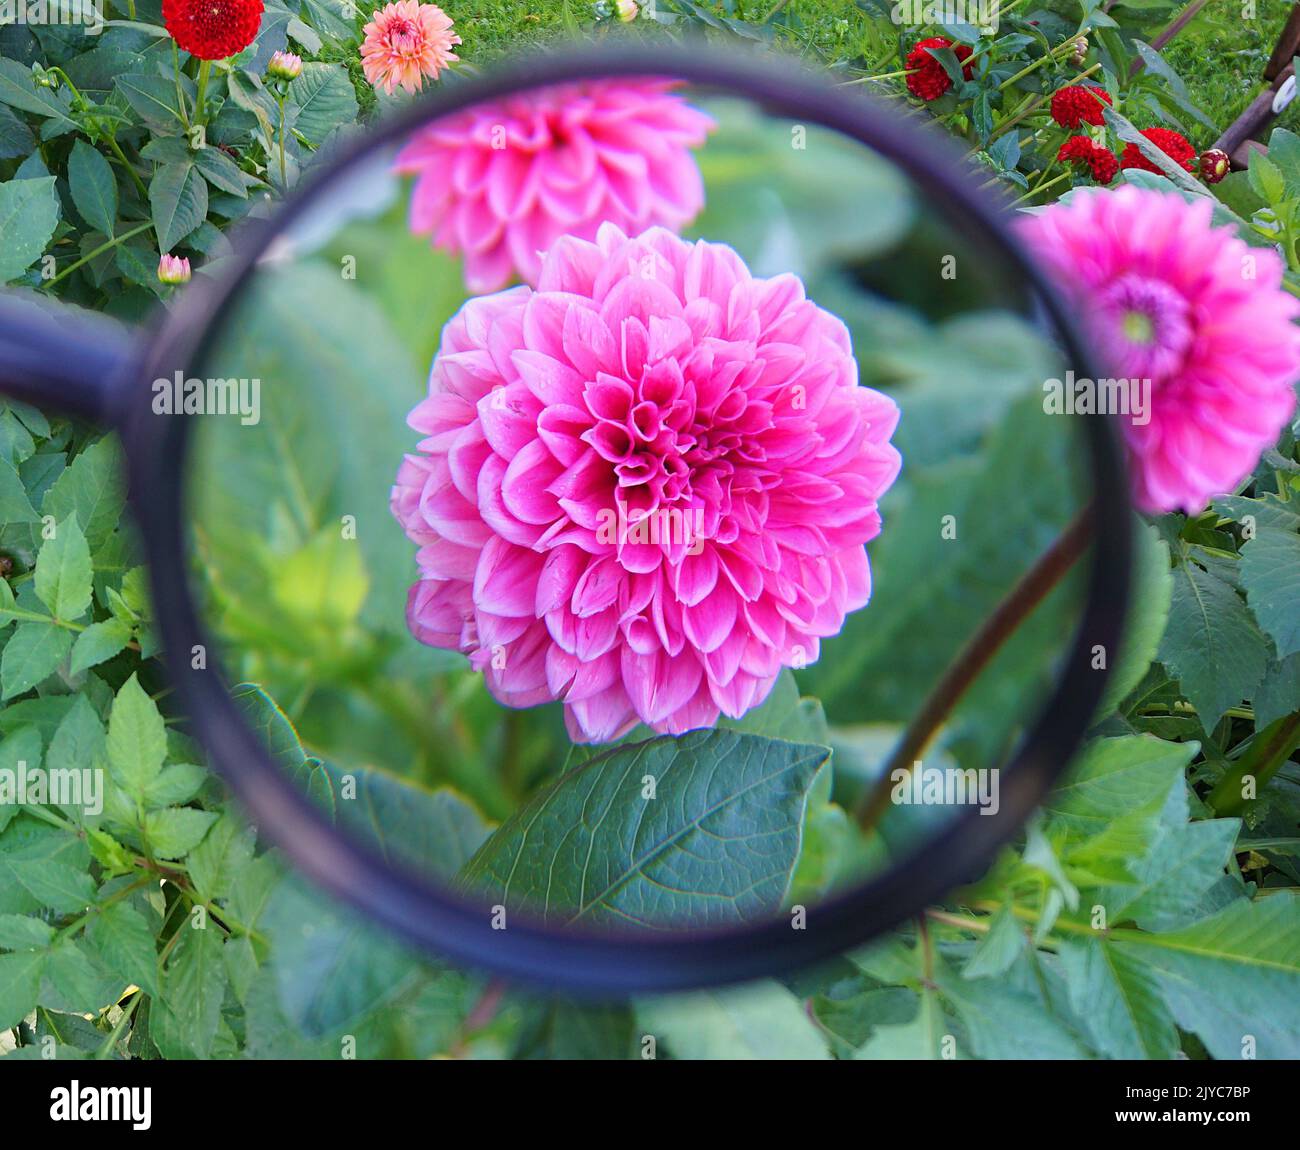 Dahlia.Flowering garden plant native to Mexico and Central America Stock Photo